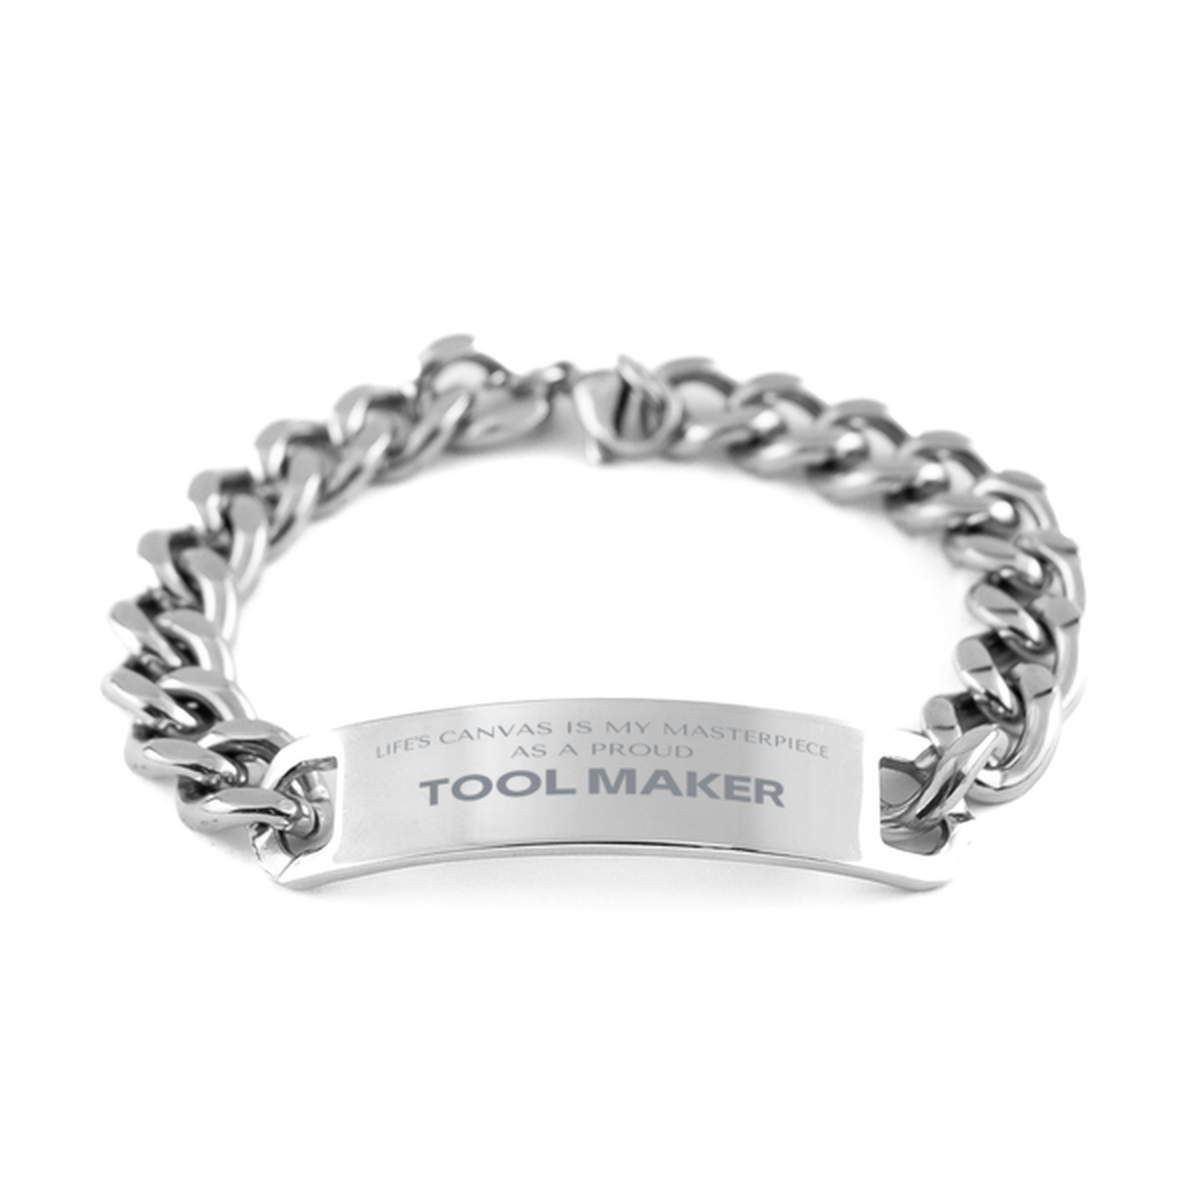 Proud Tool Maker Gifts, Life's canvas is my masterpiece, Epic Birthday Christmas Unique Cuban Chain Stainless Steel Bracelet For Tool Maker, Coworkers, Men, Women, Friends